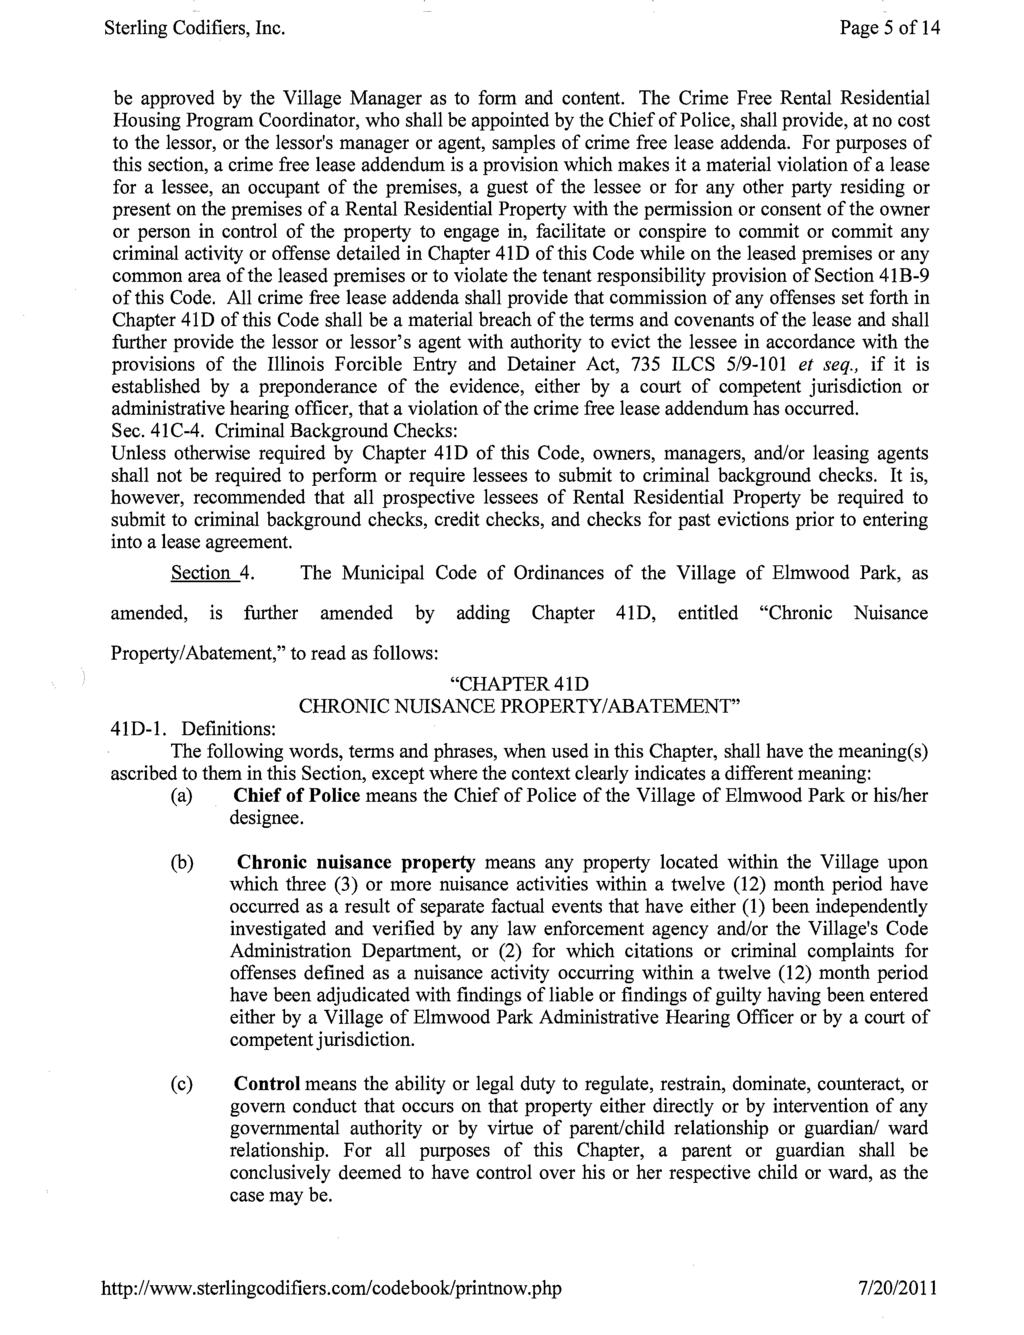 Sterling Codifiers, Inc. Page 5 of 14 be approved by the Village Manager as to form and content.